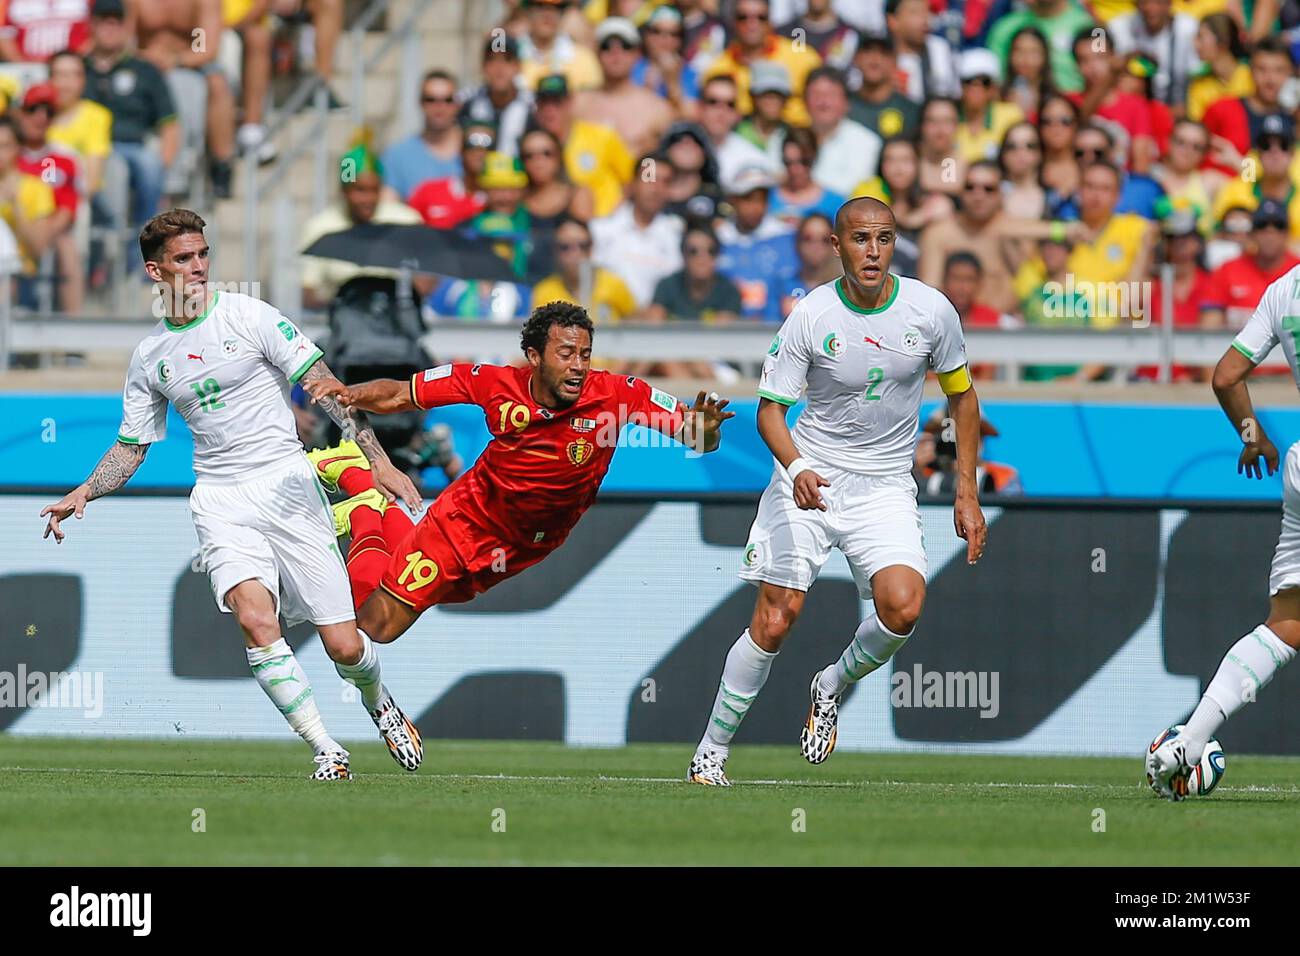 Algeria's Carl Medjani and Belgium's Moussa Dembele fight for the ball during a soccer game between Belgian national team The Red Devils and Algeria in Belo Horizonte, Brazil, the first game in Group H of the first round of the 2014 FIFA World Cup, Tuesday 17 June 2014. Stock Photo